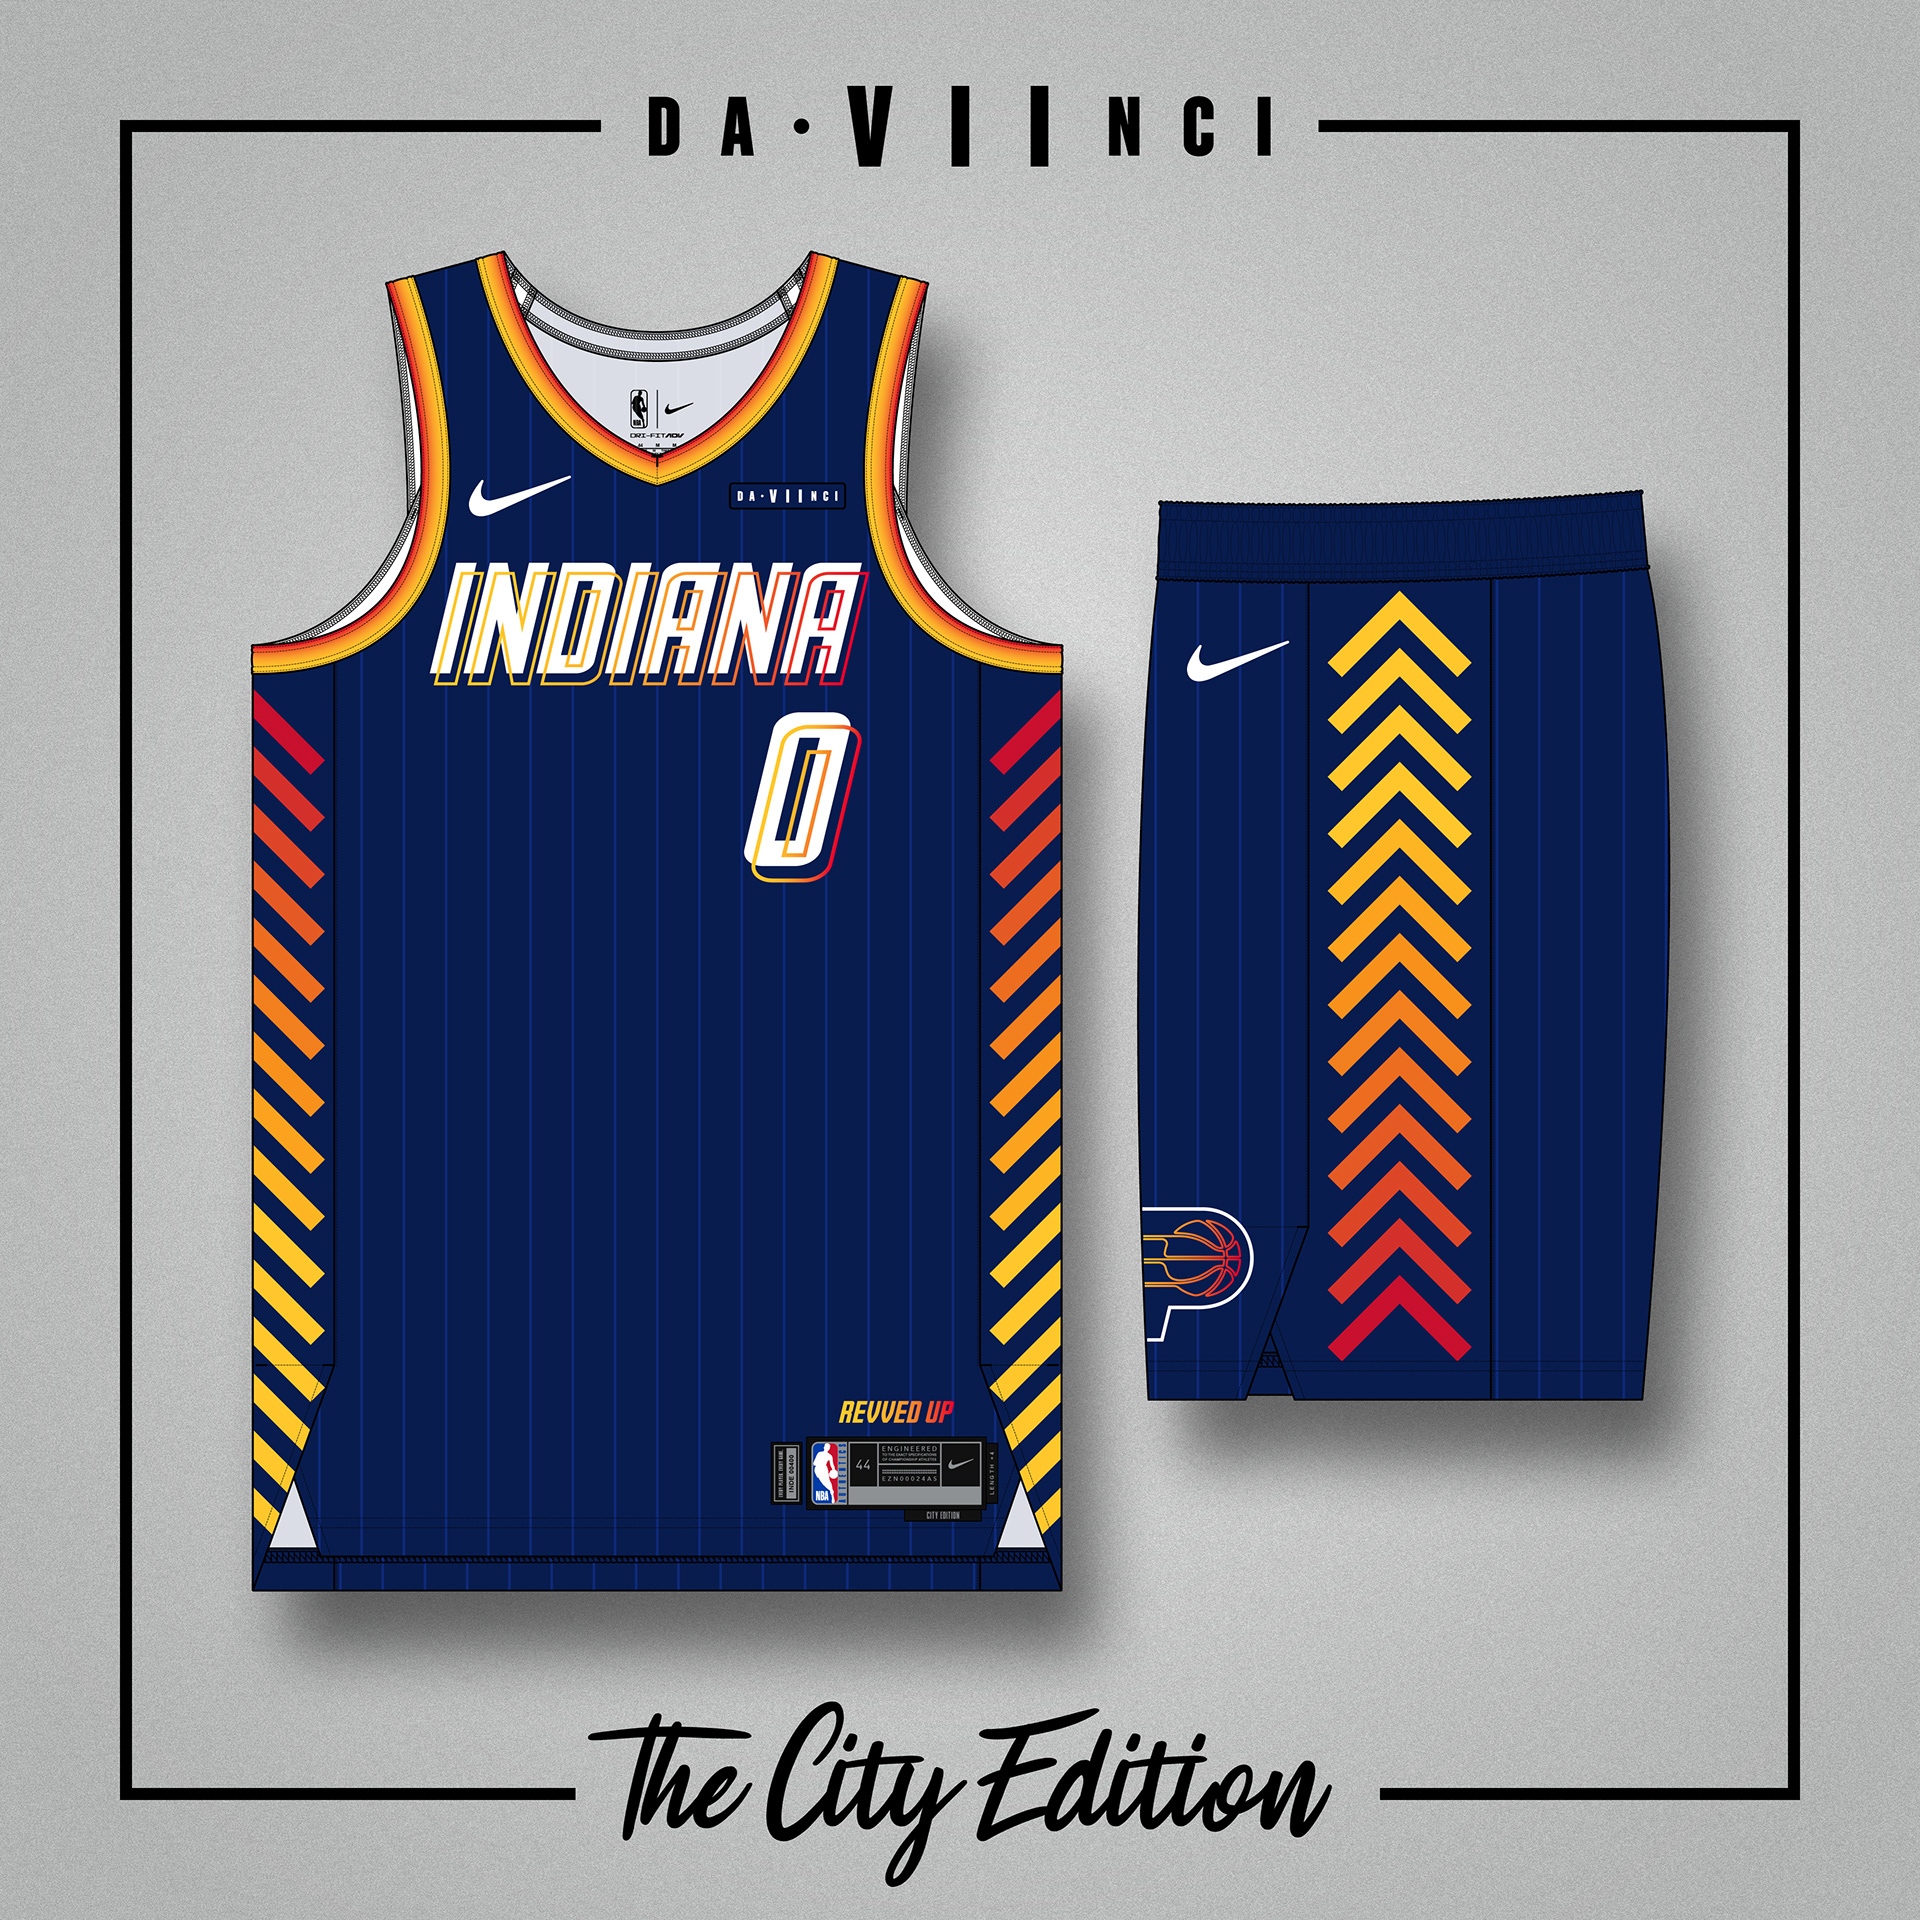 INDIANA PACERS x NIKE City Edition Concept on Behance